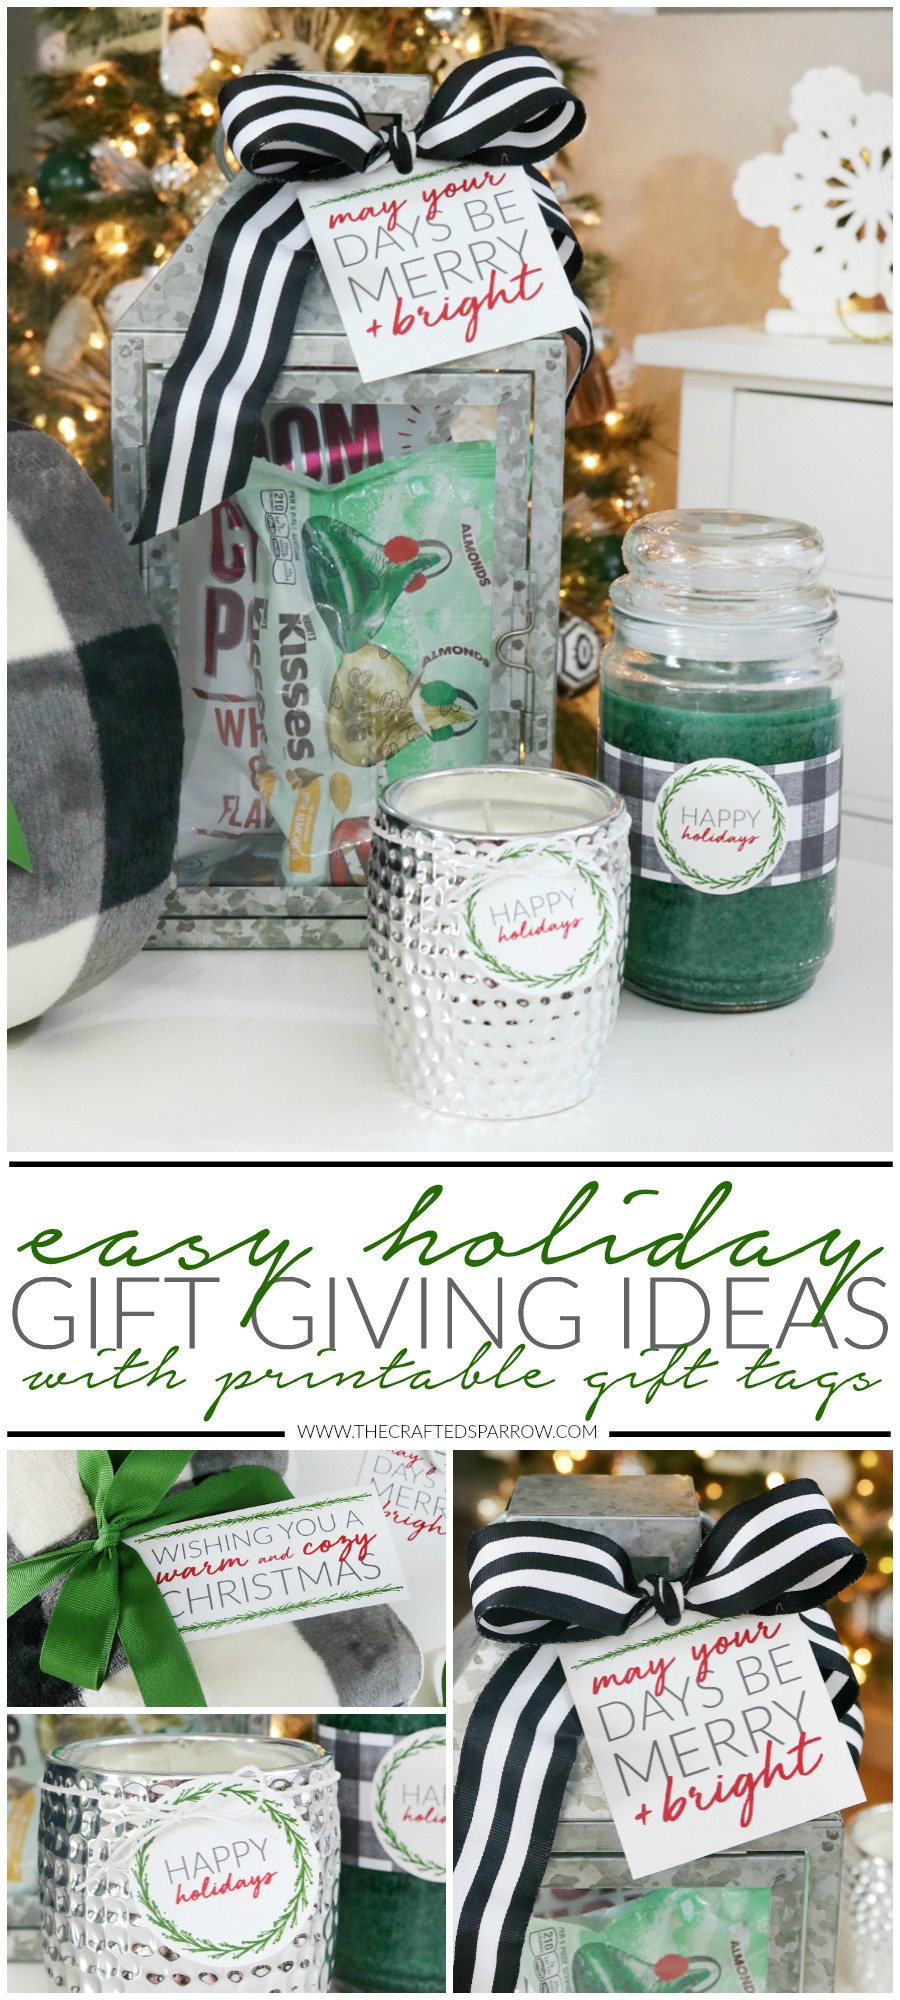 https://www.thecraftedsparrow.com/wp-content/uploads/2017/12/Easy-Holiday-Gift-Giving-Ideas-with-Printable-Gift-Tags.jpg